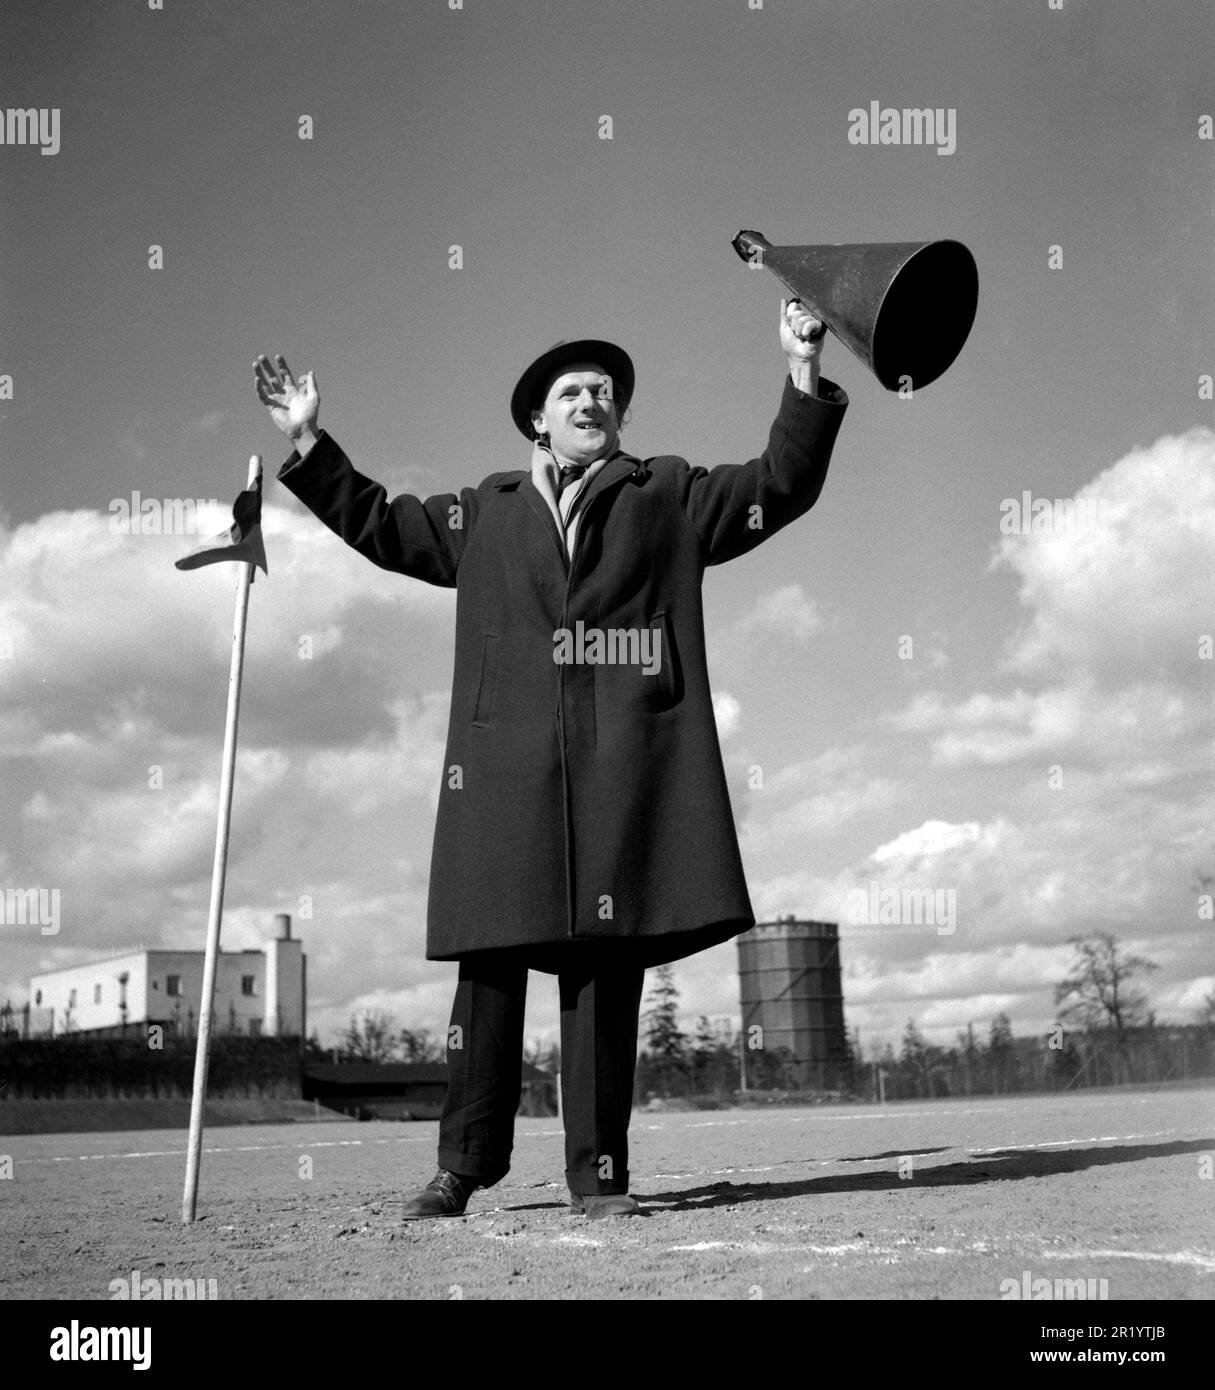 1940s man.  A man is standing on a football field cheering with raised arms with a megaphone in the left hand. Perhaps a lonely spectator at a football match. The megaphone was a device used to make your voice better and louder heard, screaming through it. 24 april 1949. Conard  ref 1104 Stock Photo